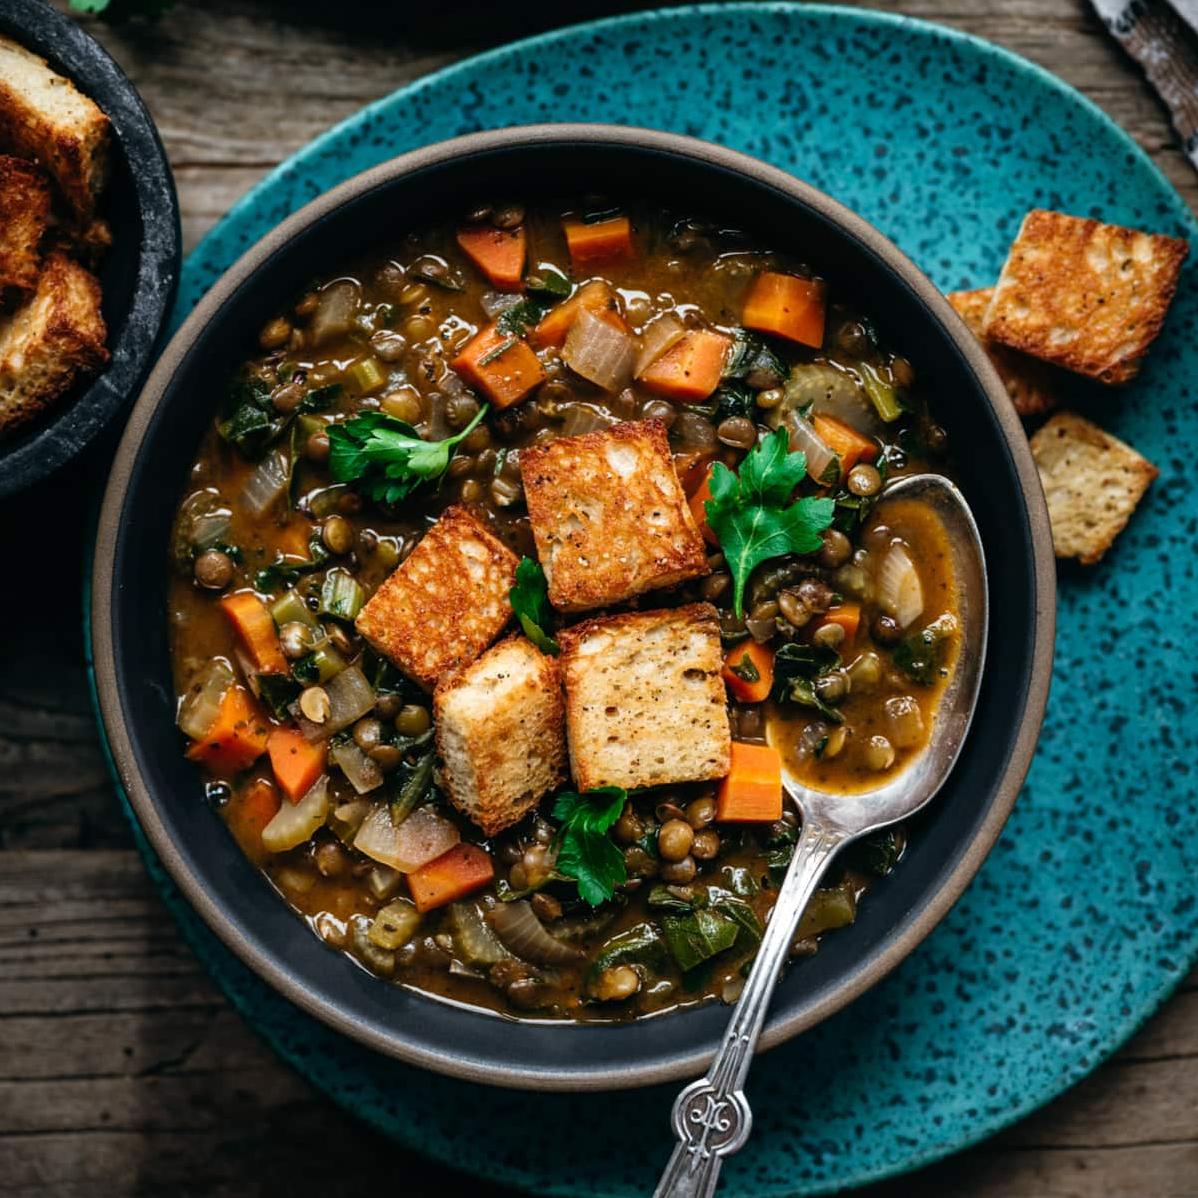  A hearty meal in a bowl – Lentil Tofu Soup